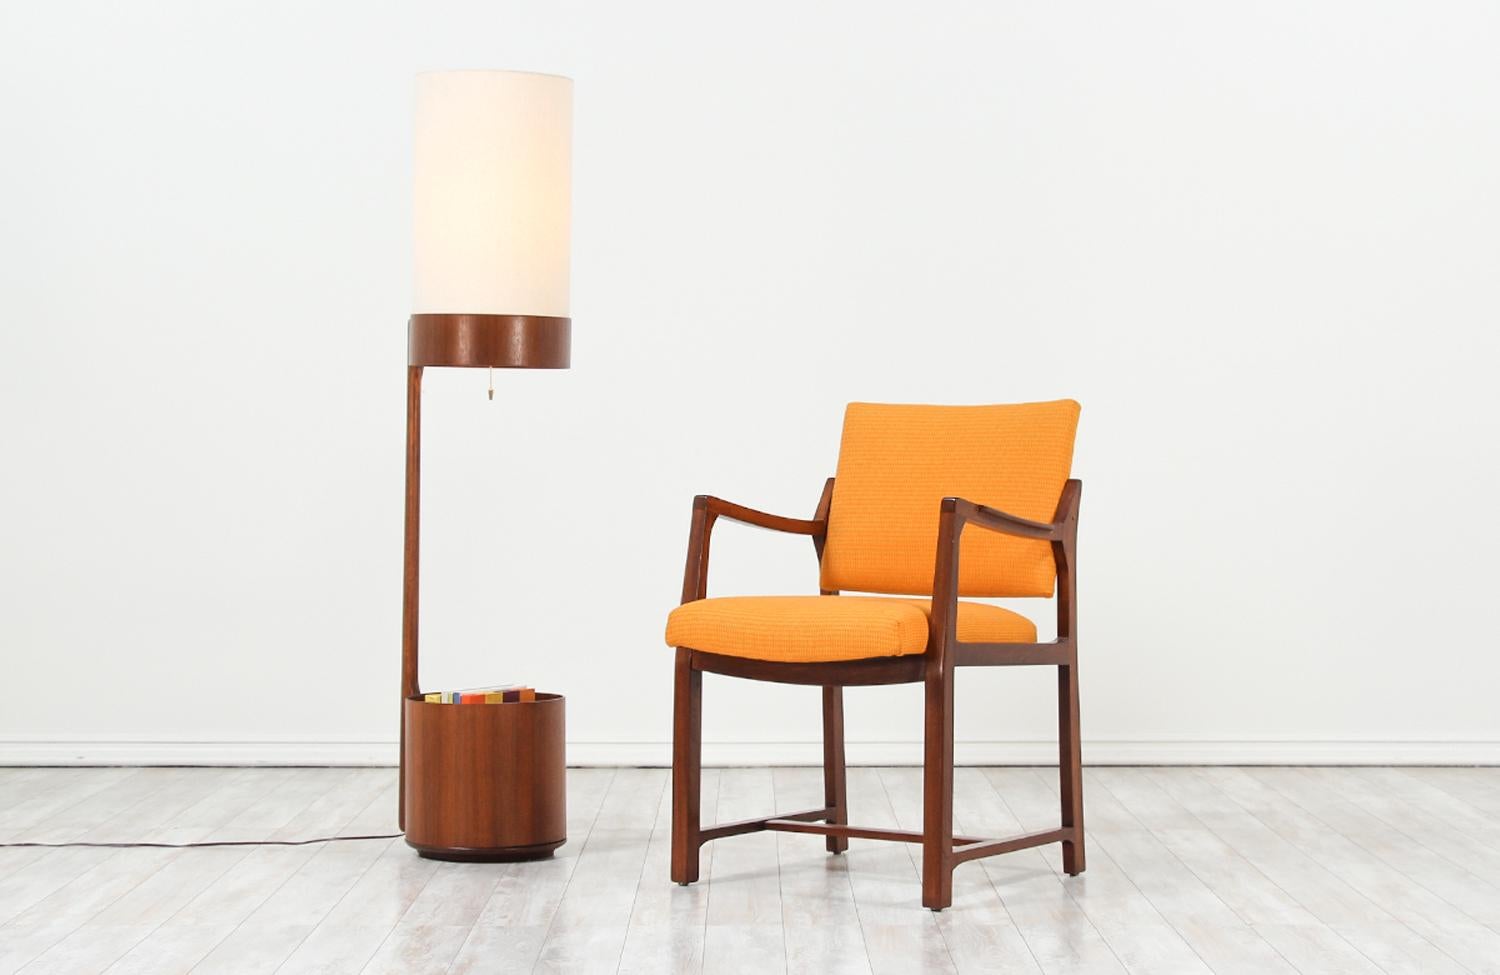 Stylish modern floor lamp designed and manufactured by Modeline of California in the United States circa 1960s. This gorgeous and multifunctional floor lamp is crafted from walnut wood featuring a tall body and a lower magazine storage space. This